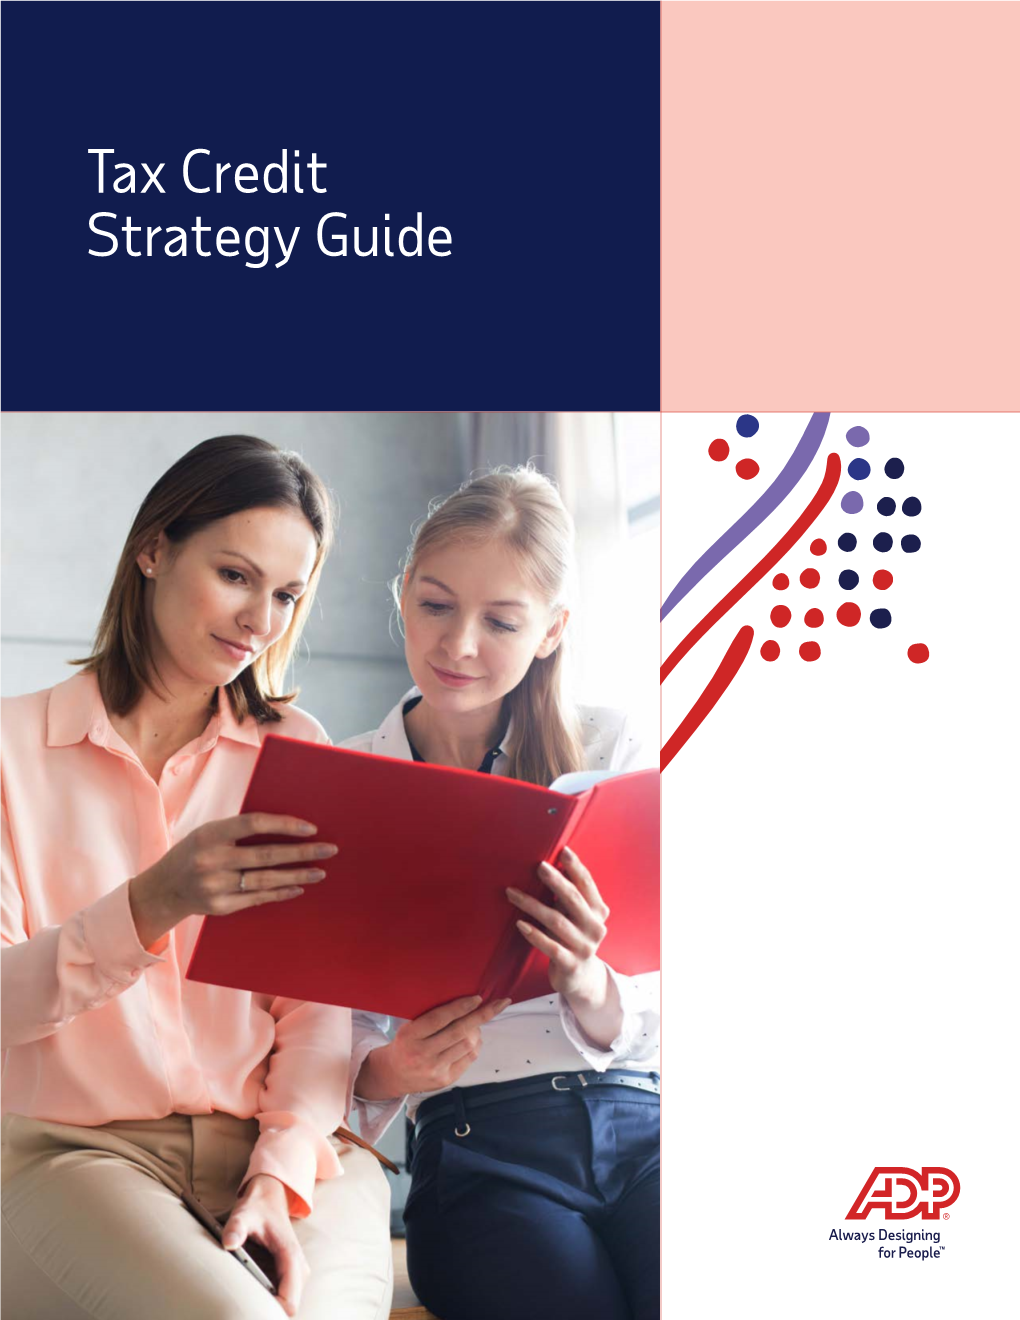 Tax Credit Strategy Guide Table of Contents